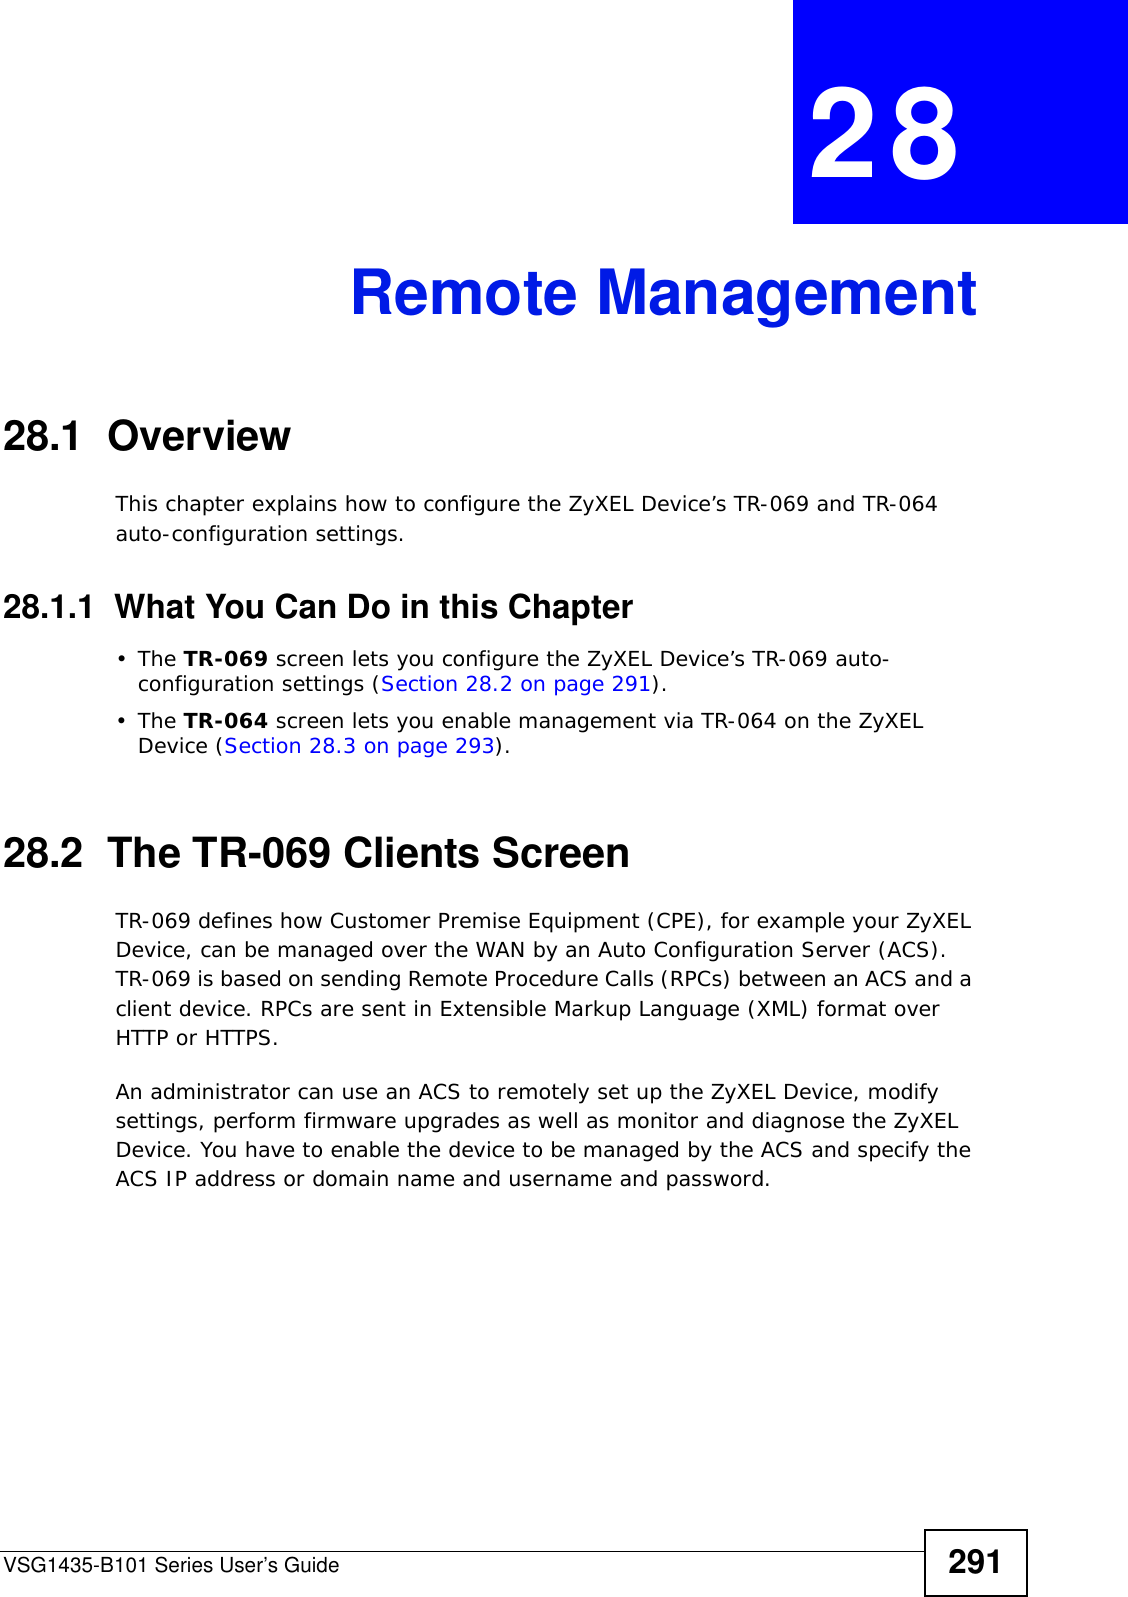 VSG1435-B101 Series User’s Guide 291CHAPTER  28 Remote Management28.1  OverviewThis chapter explains how to configure the ZyXEL Device’s TR-069 and TR-064 auto-configuration settings.28.1.1  What You Can Do in this Chapter•The TR-069 screen lets you configure the ZyXEL Device’s TR-069 auto-configuration settings (Section 28.2 on page 291).•The TR-064 screen lets you enable management via TR-064 on the ZyXEL Device (Section 28.3 on page 293).28.2  The TR-069 Clients ScreenTR-069 defines how Customer Premise Equipment (CPE), for example your ZyXEL Device, can be managed over the WAN by an Auto Configuration Server (ACS). TR-069 is based on sending Remote Procedure Calls (RPCs) between an ACS and a client device. RPCs are sent in Extensible Markup Language (XML) format over HTTP or HTTPS. An administrator can use an ACS to remotely set up the ZyXEL Device, modify settings, perform firmware upgrades as well as monitor and diagnose the ZyXEL Device. You have to enable the device to be managed by the ACS and specify the ACS IP address or domain name and username and password.